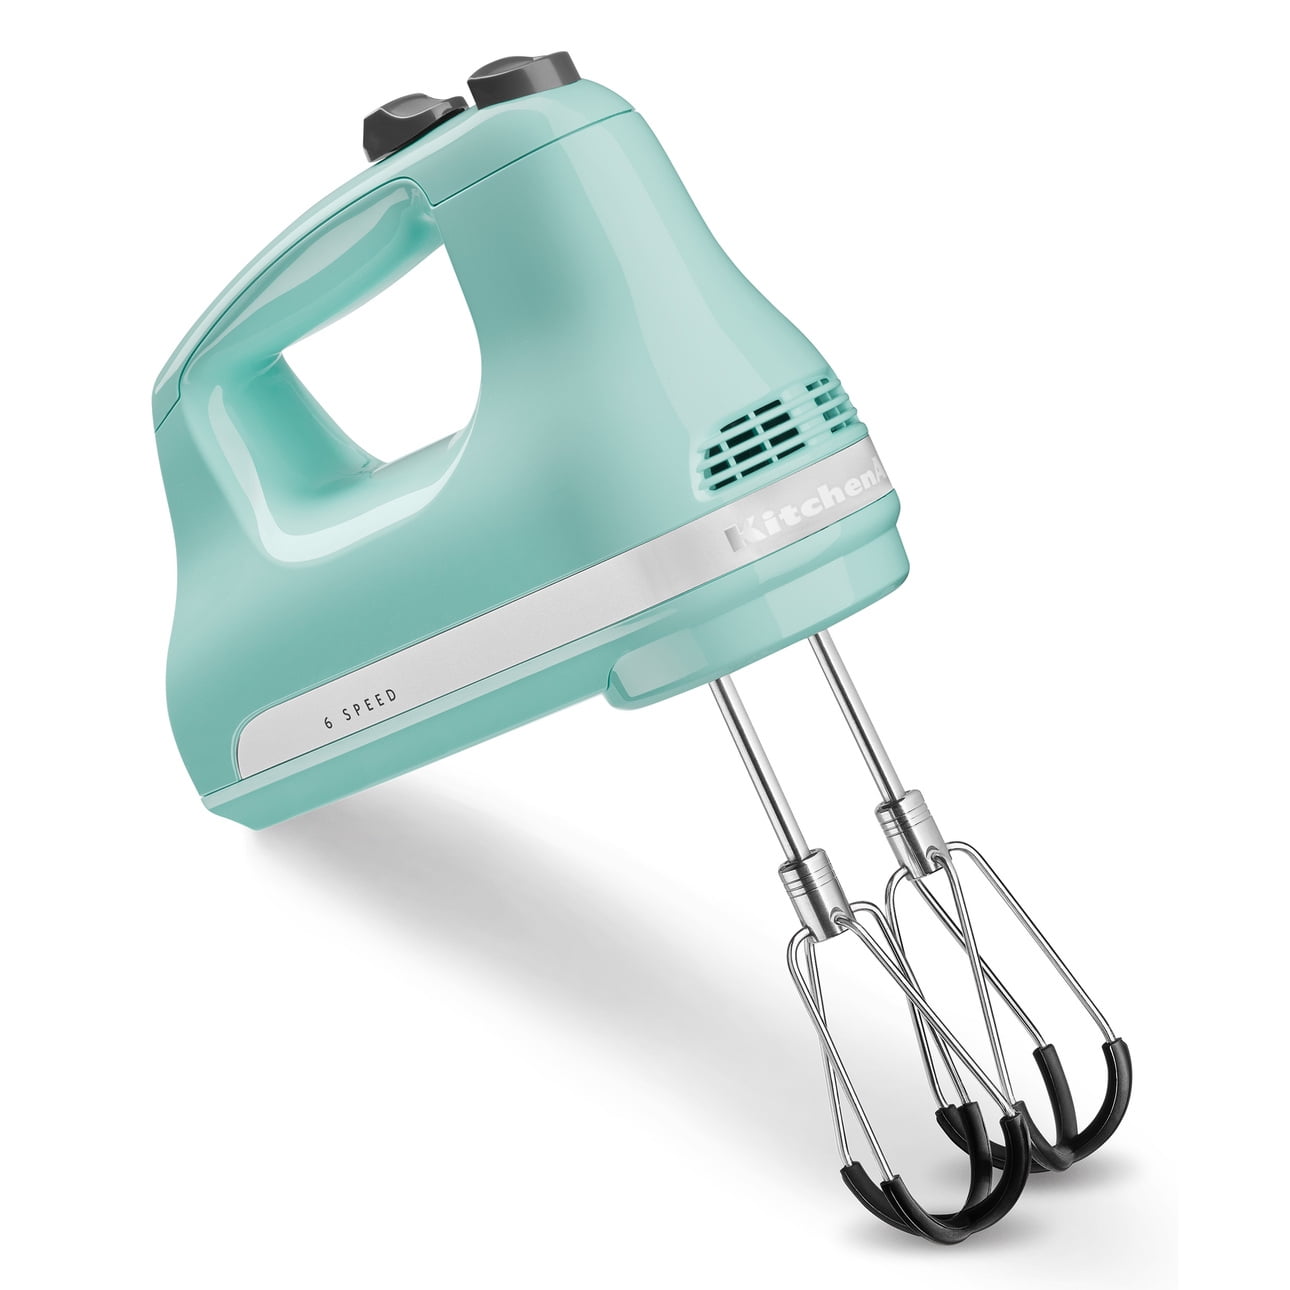  KitchenAid 6 Speed Hand Mixer with Flex Edge Beaters - KHM6118  & Variable Speed Corded Hand Blender - KHBV53: Home & Kitchen